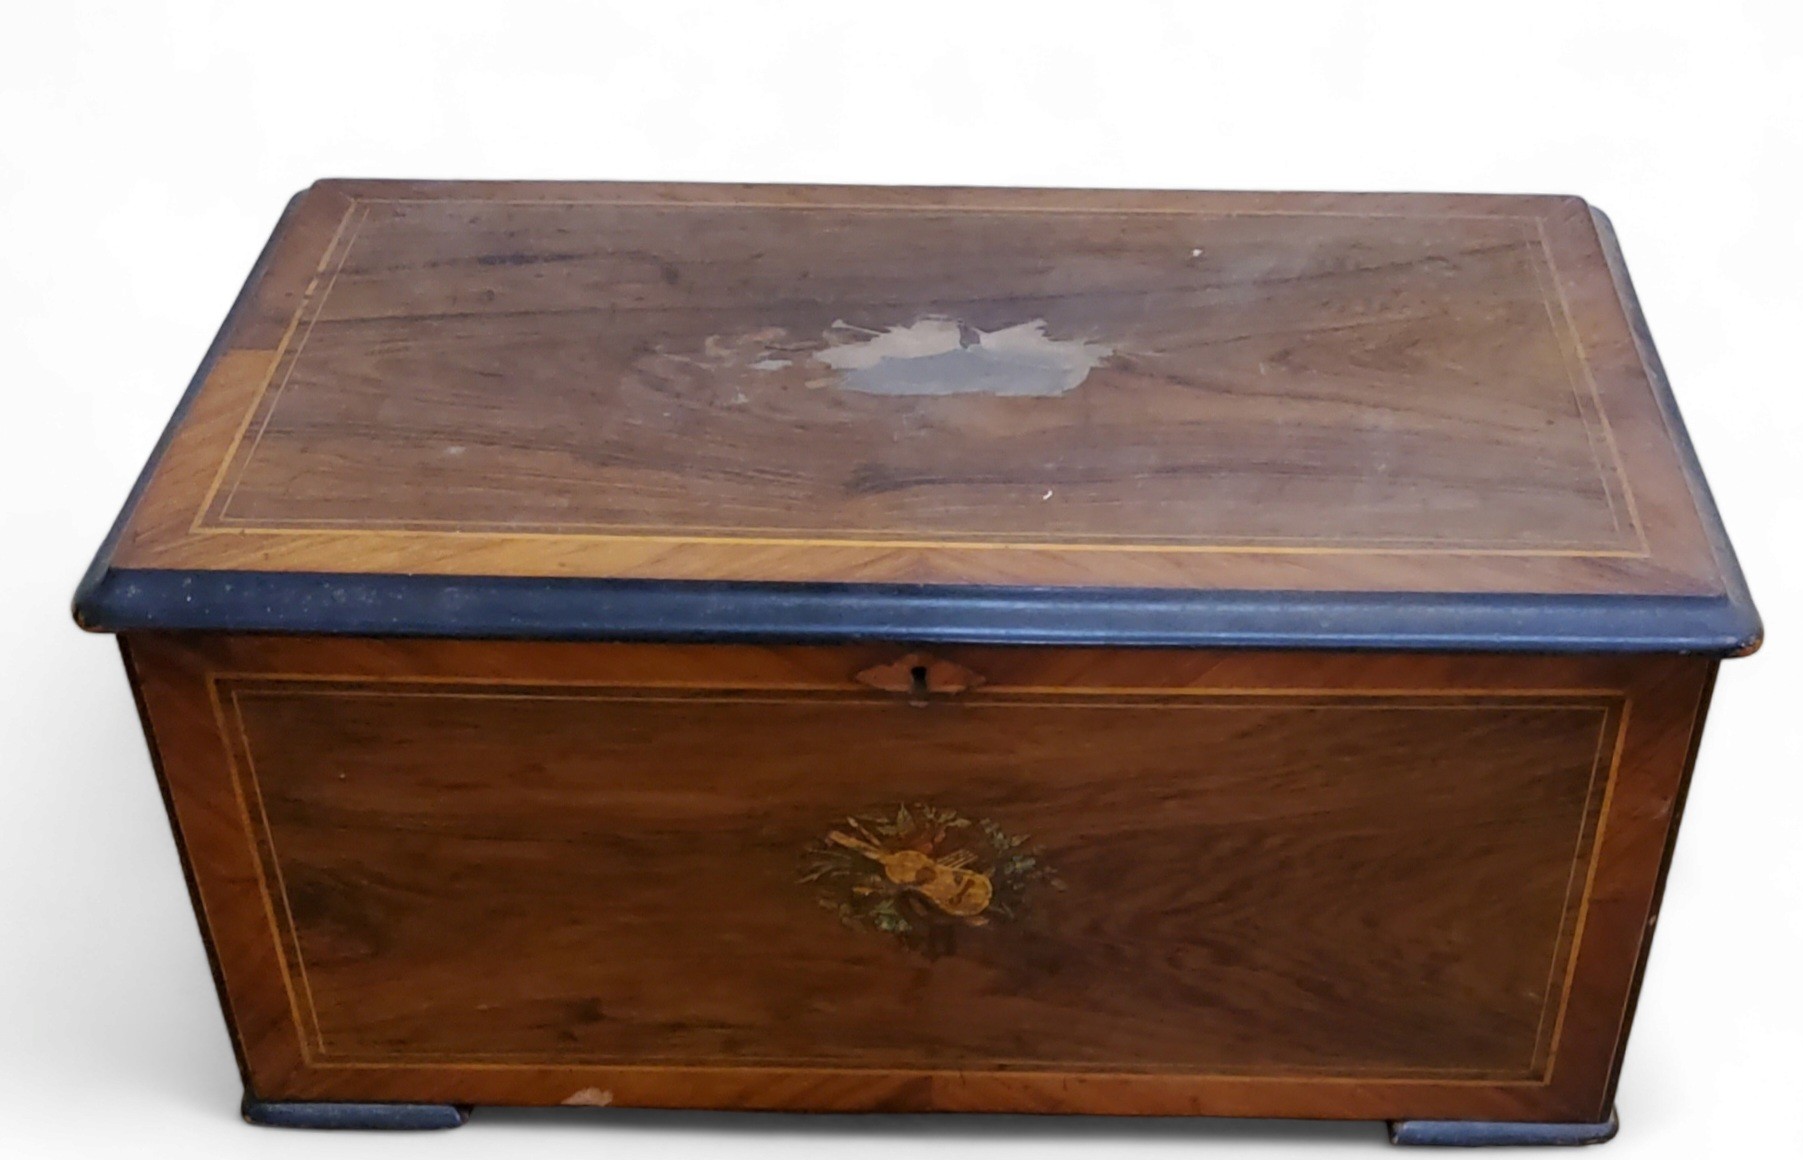 A 19th century Swiss rosewood rectangular music box case, printed with musical trophies, 26cm